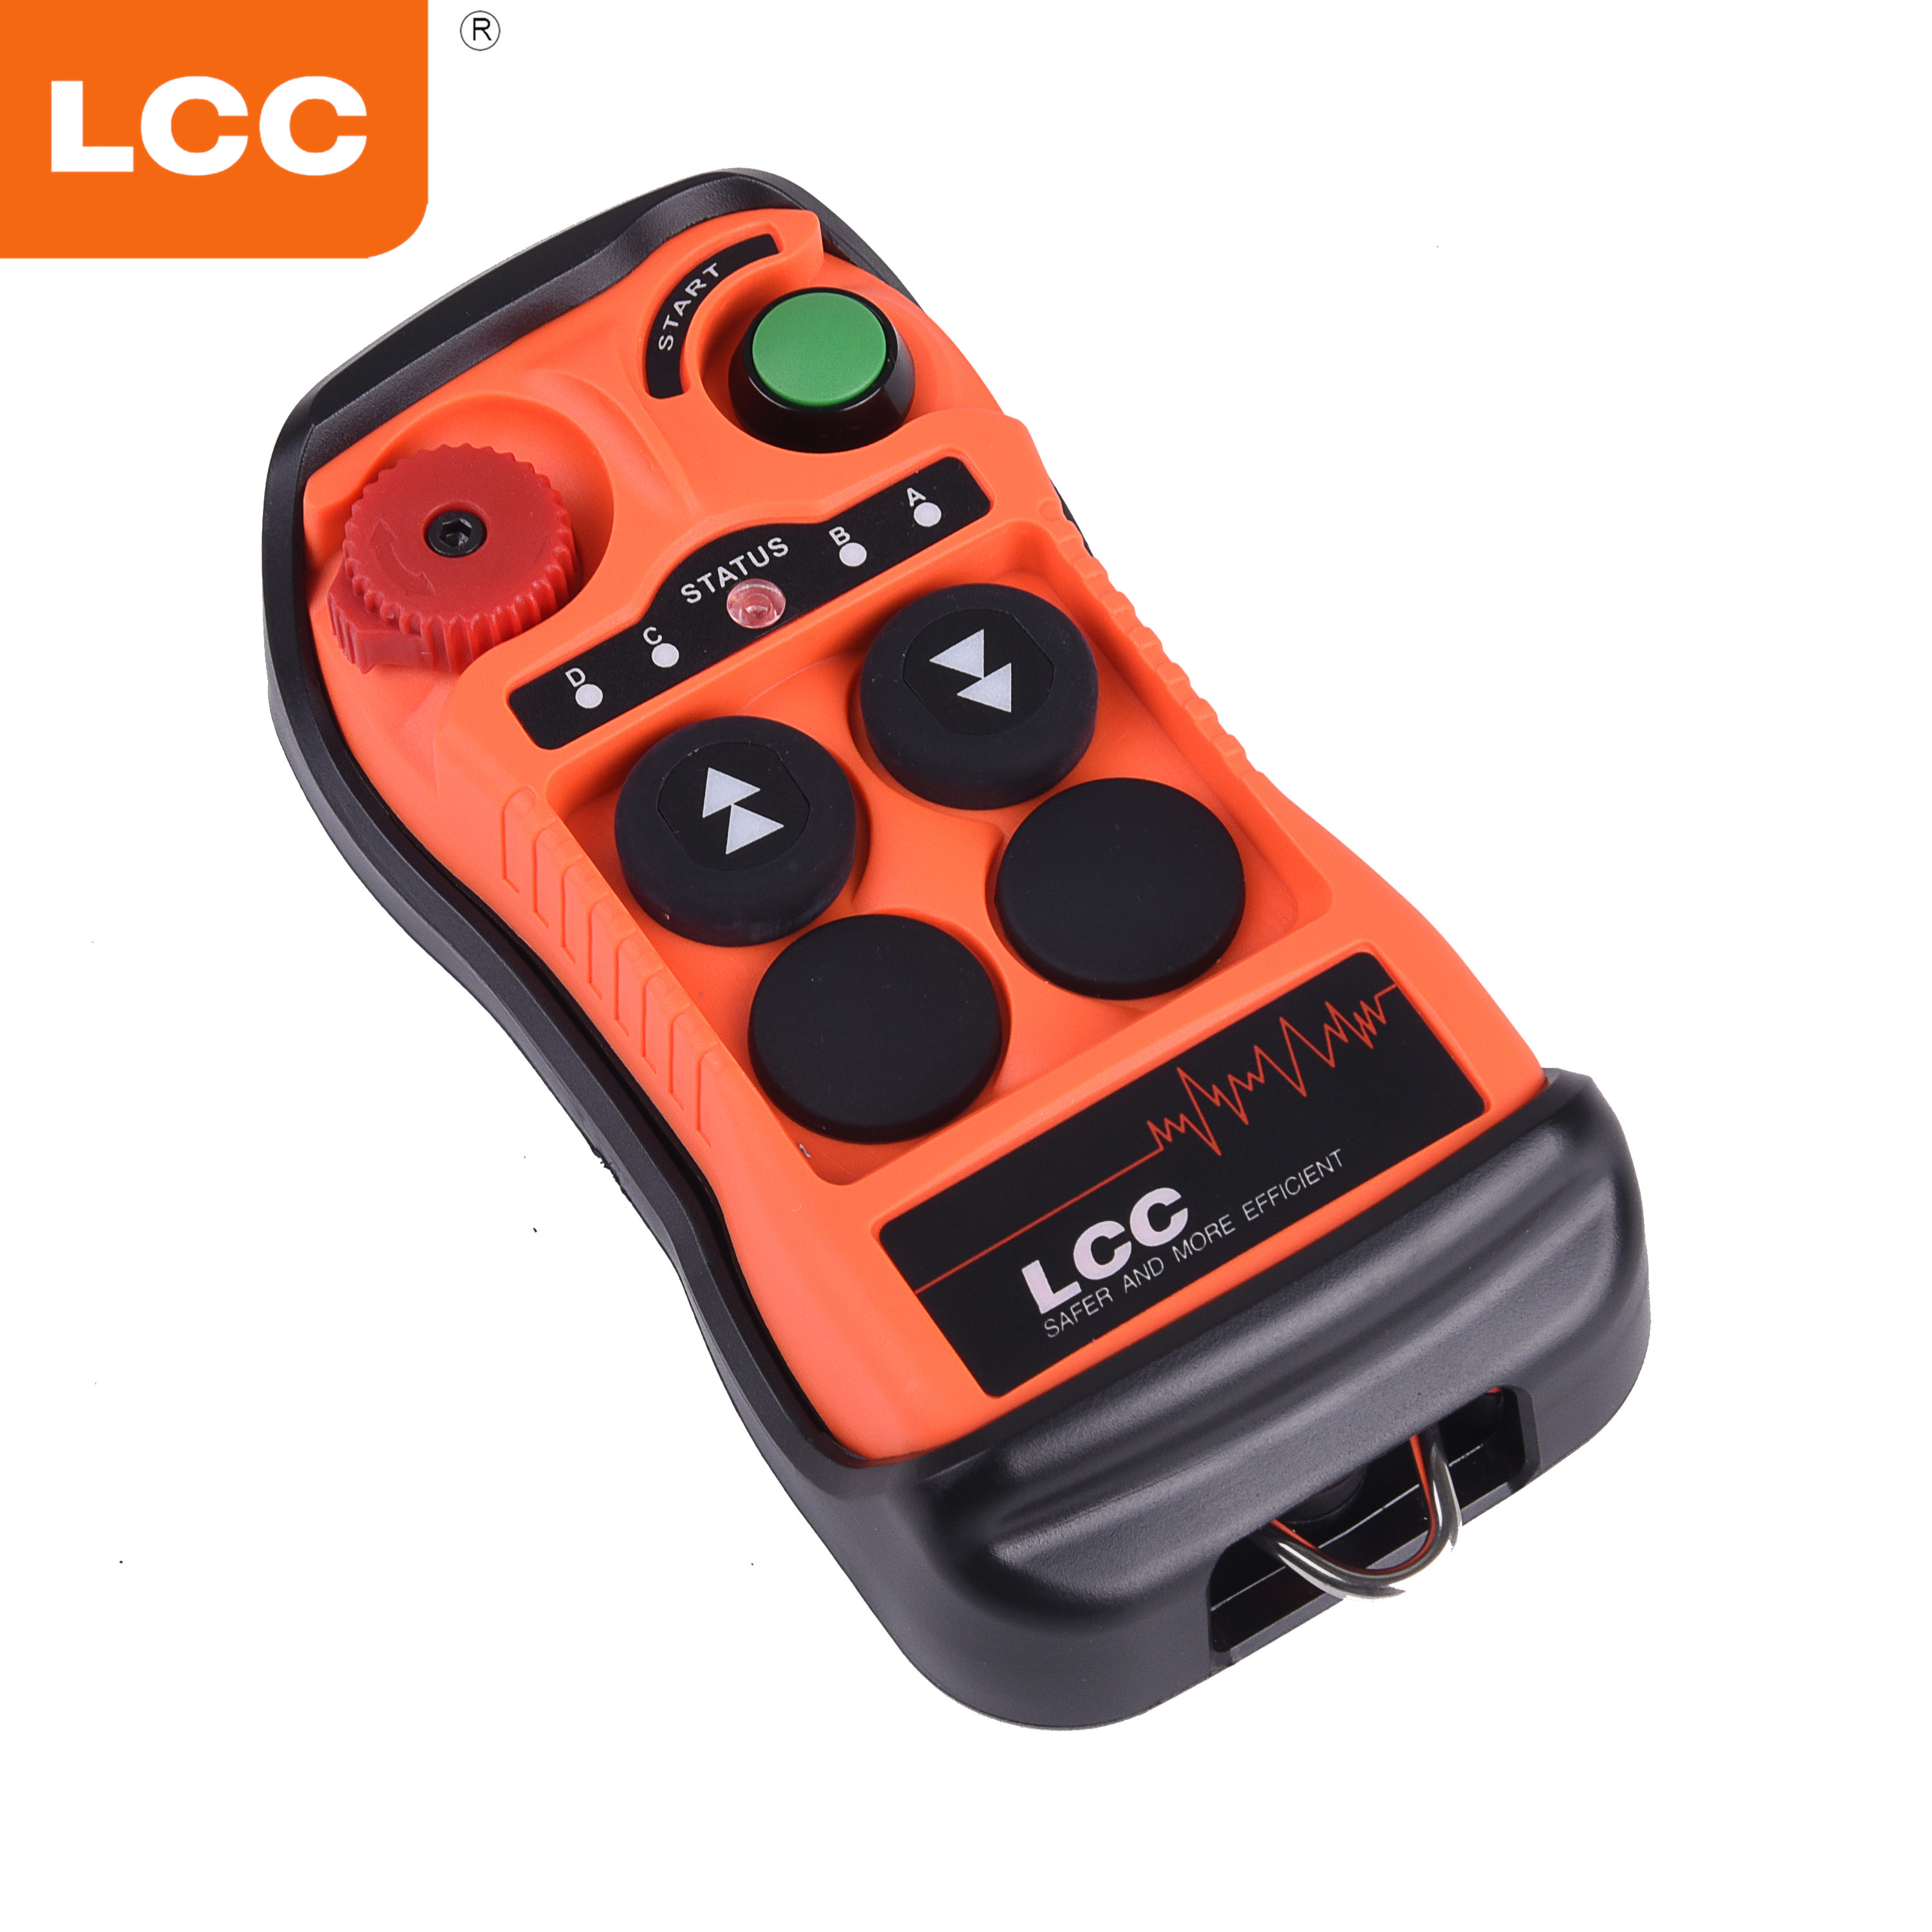 Q202 Double Step Electric Industrial Radio Remote Control for Crane